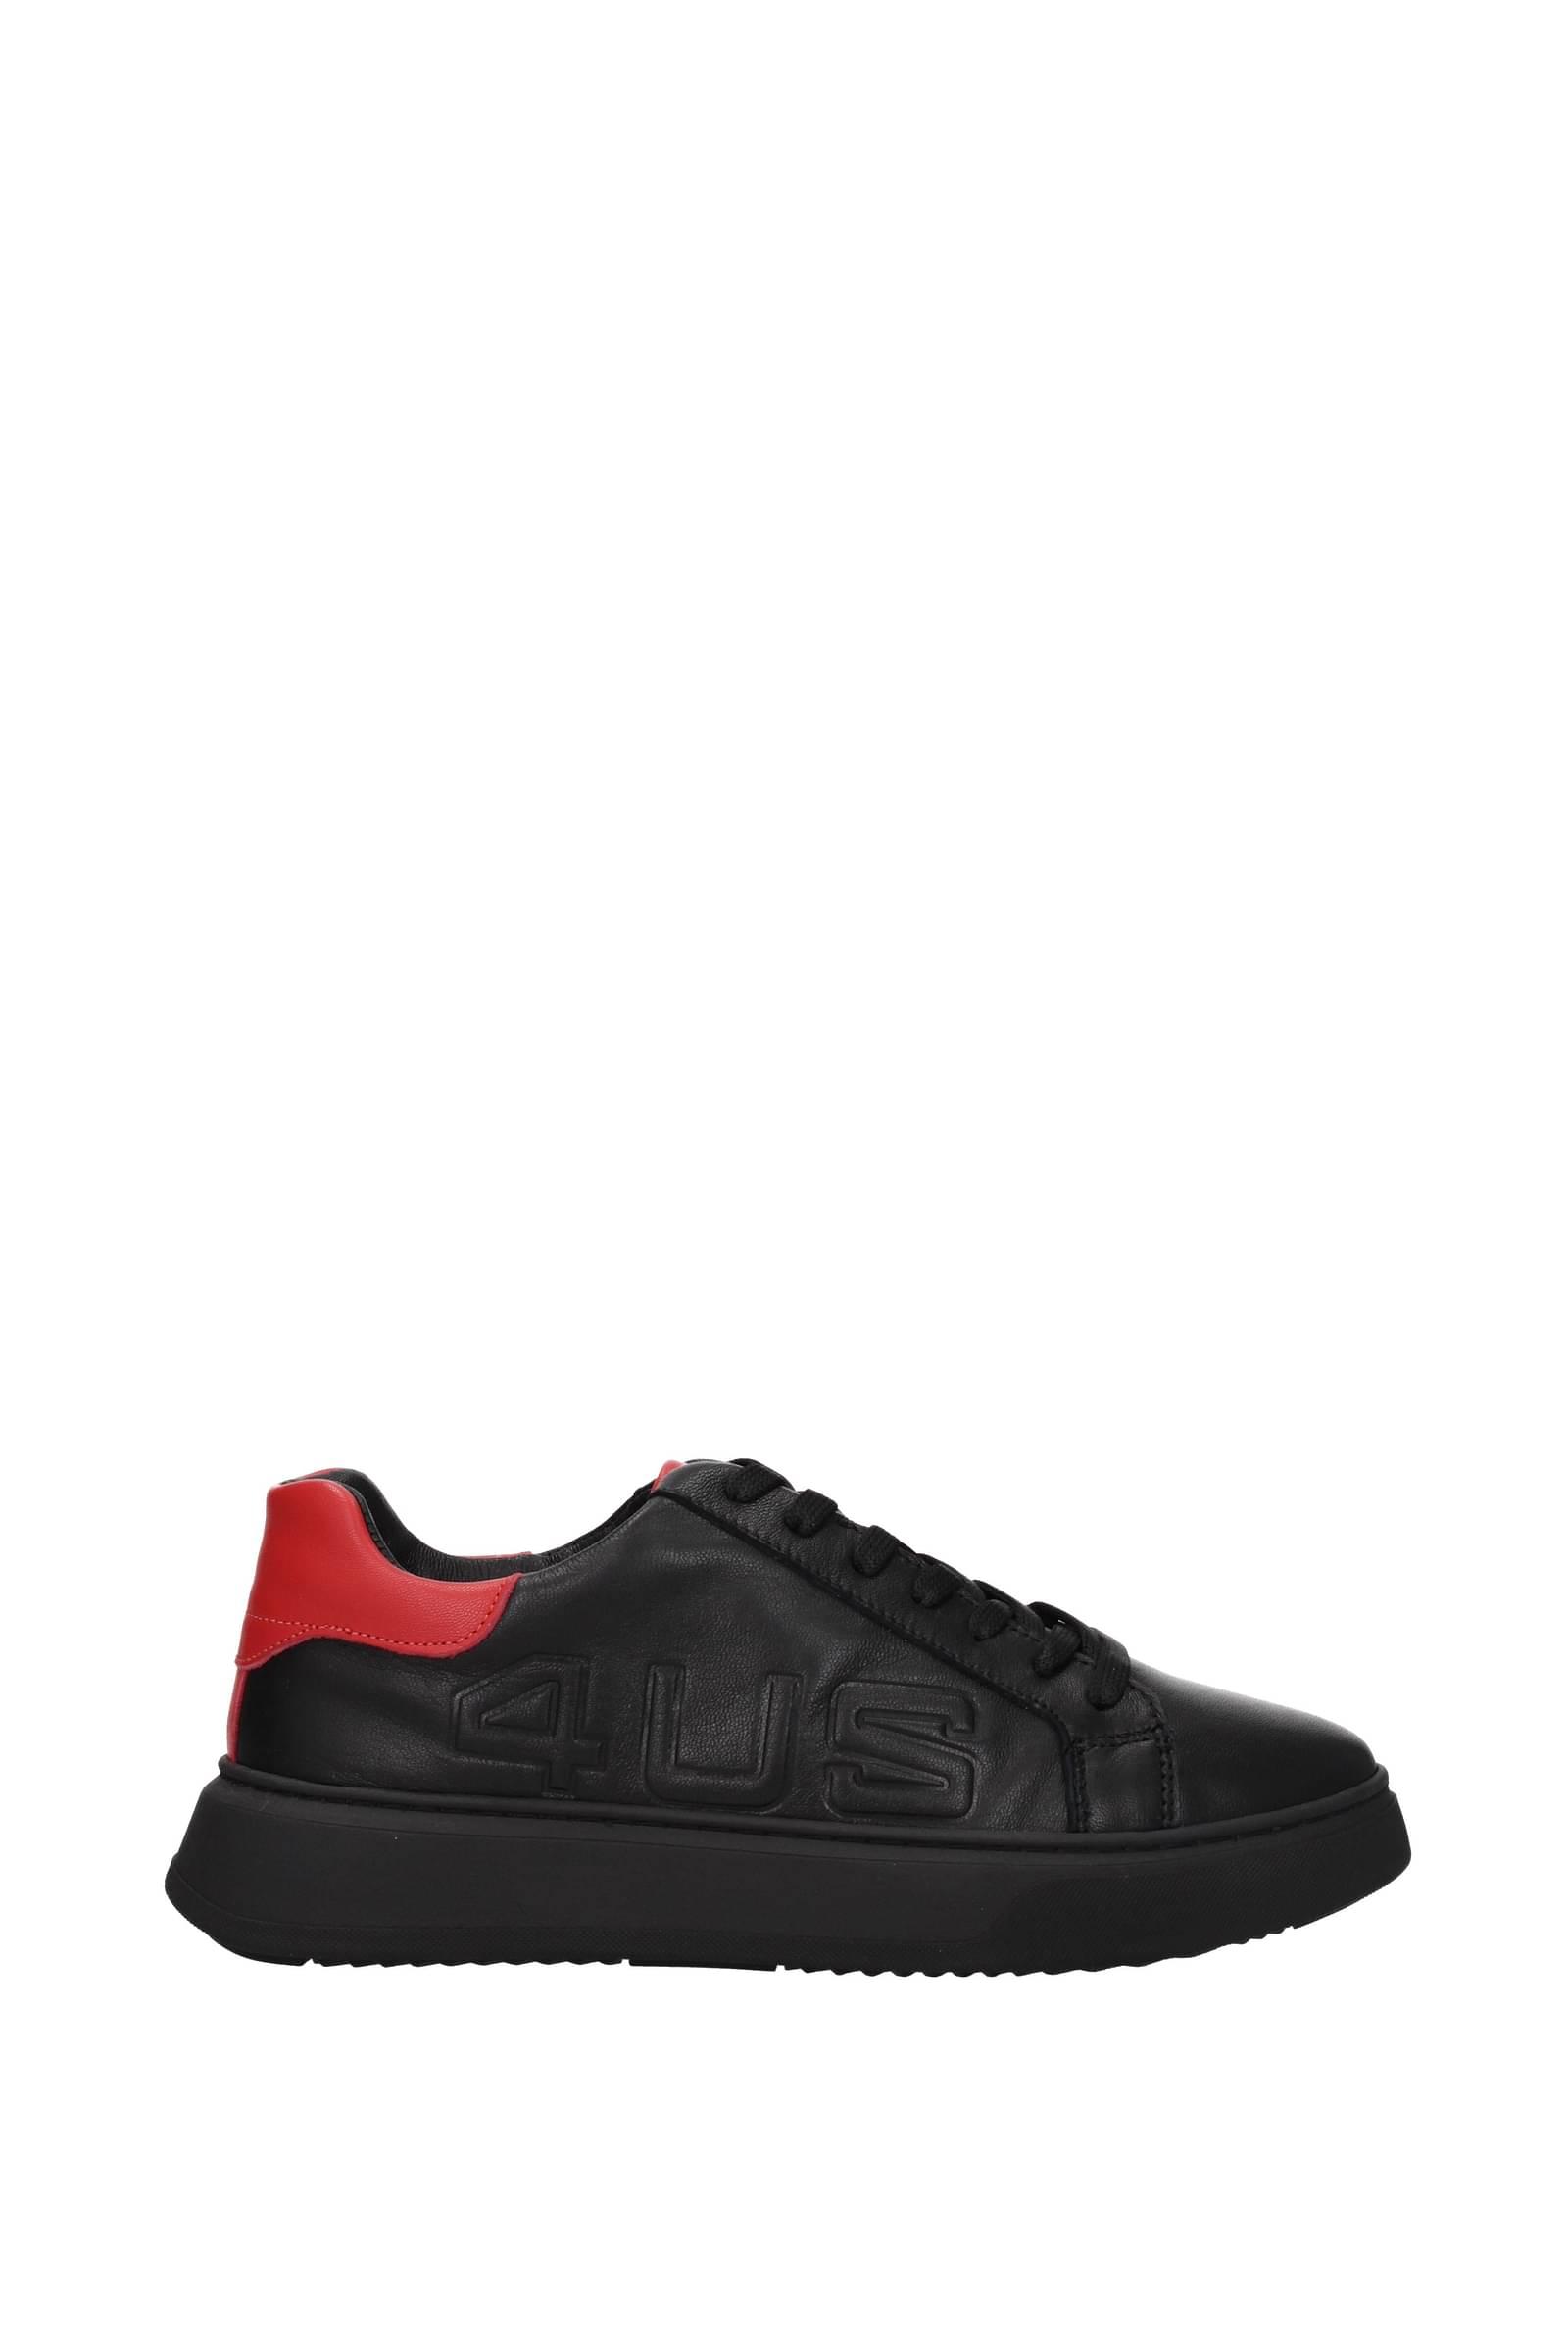 All Black Women's Sneakers for Healthcare Workers | Clove